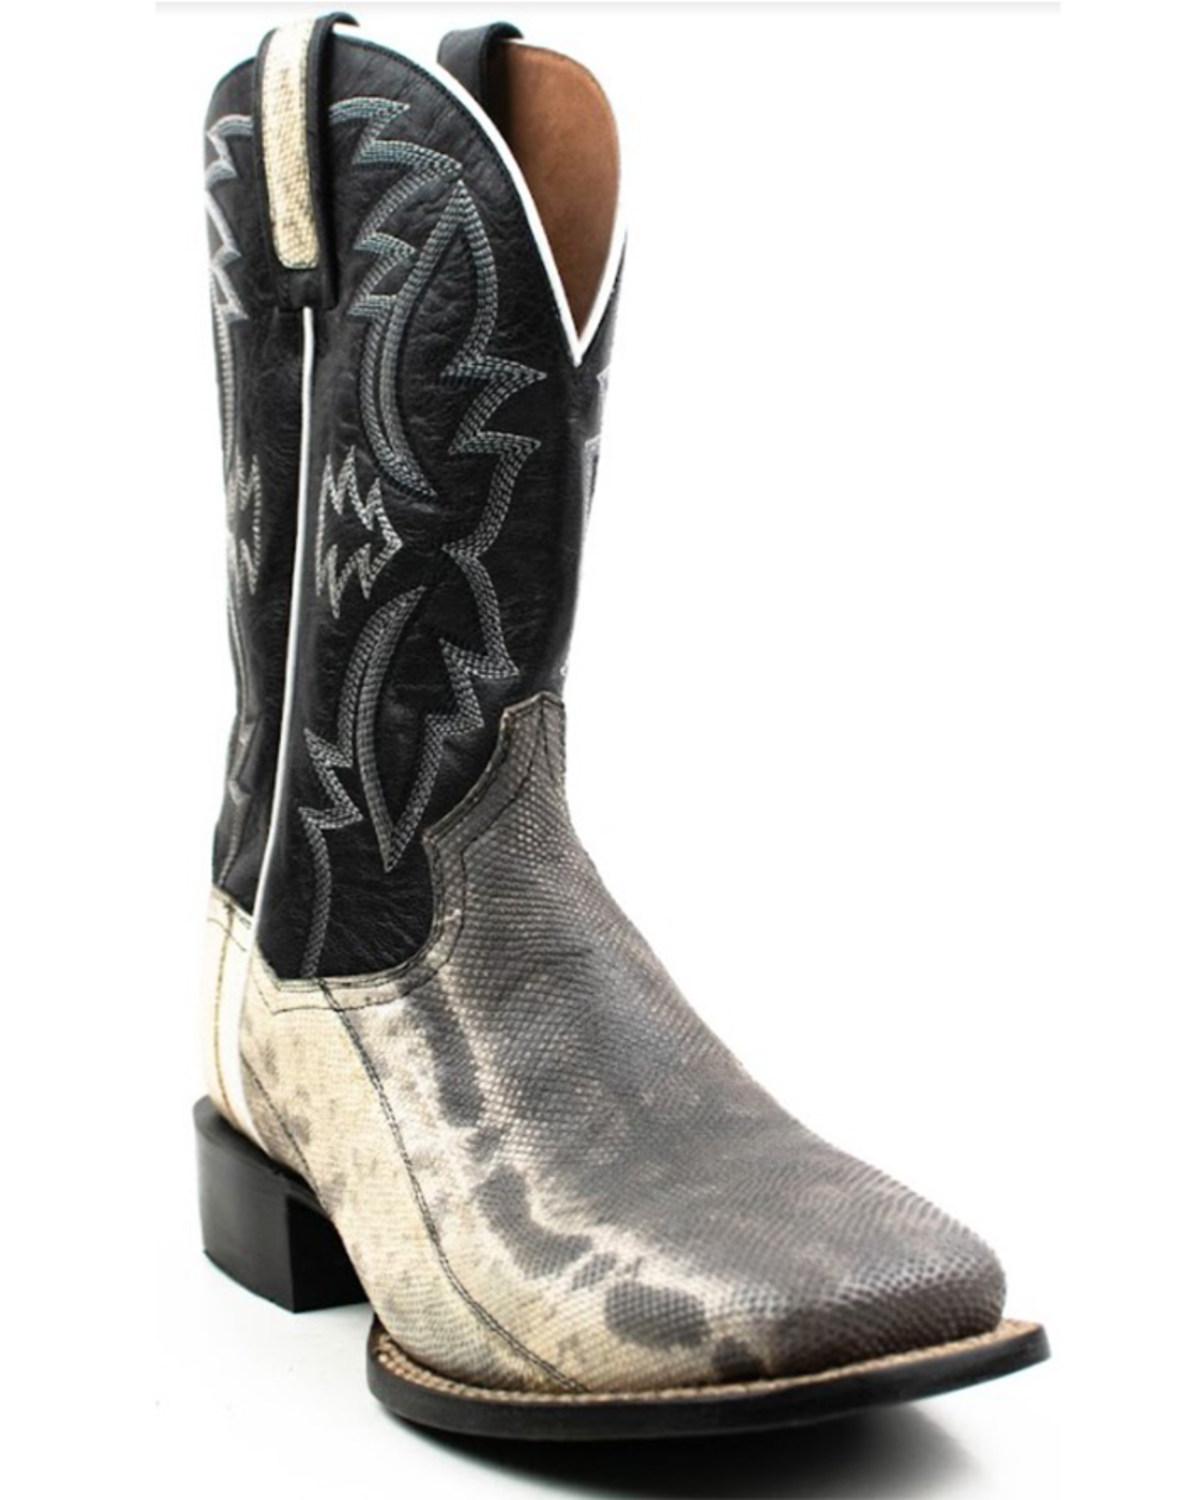 Dan Post Men's Kauring Snake Exotic Western Boots